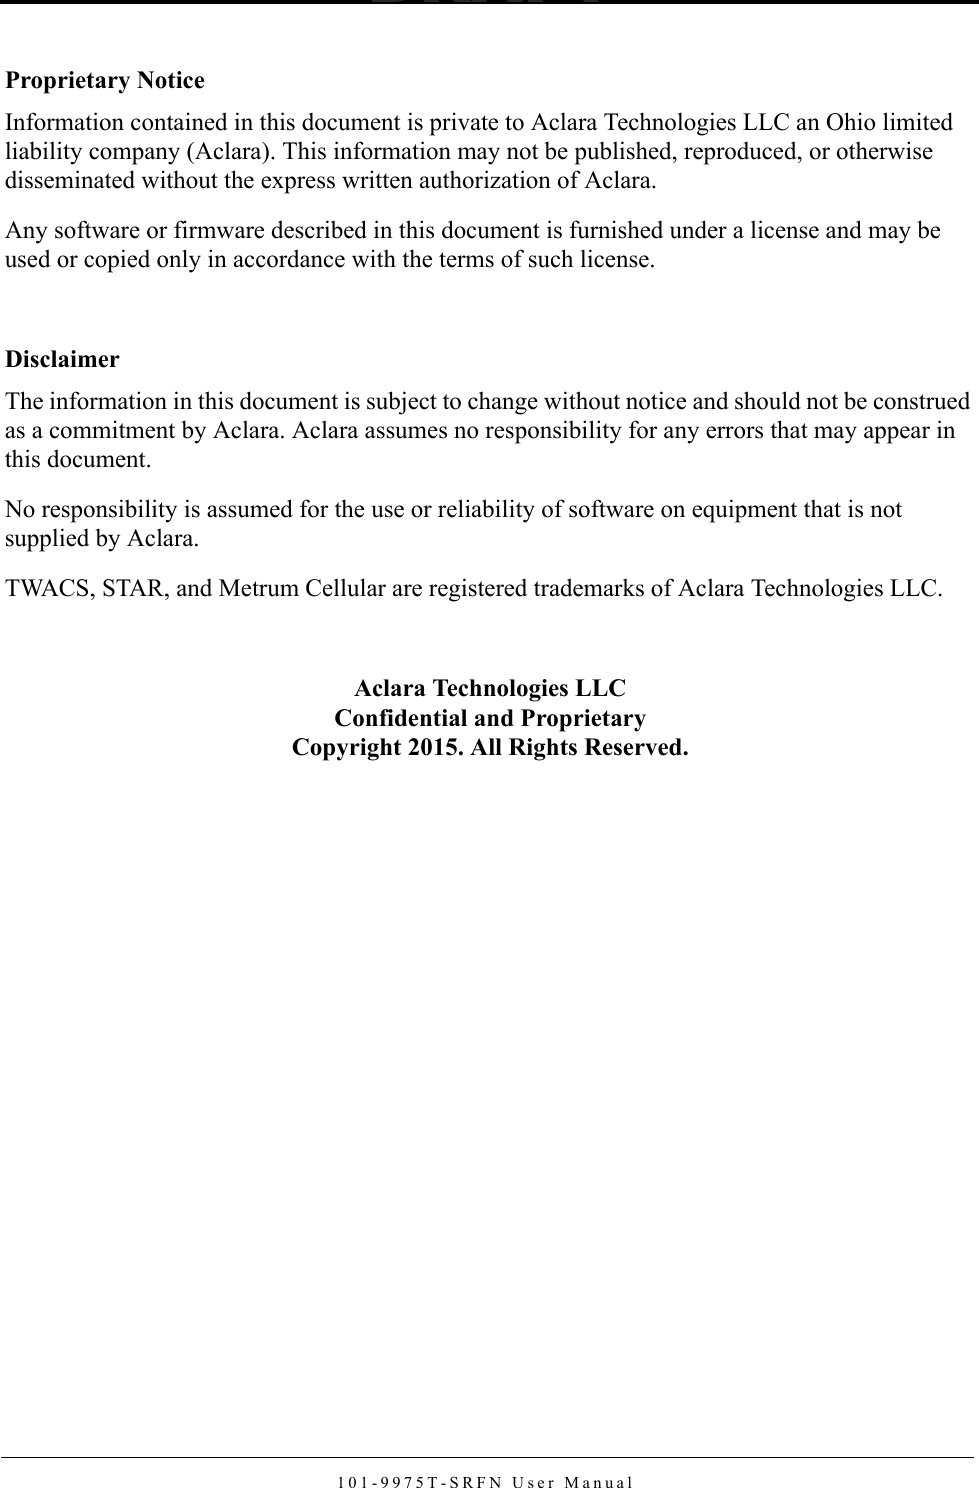 101-9975T-SRFN User ManualProprietary NoticeInformation contained in this document is private to Aclara Technologies LLC an Ohio limited liability company (Aclara). This information may not be published, reproduced, or otherwise disseminated without the express written authorization of Aclara. Any software or firmware described in this document is furnished under a license and may be used or copied only in accordance with the terms of such license.DisclaimerThe information in this document is subject to change without notice and should not be construed as a commitment by Aclara. Aclara assumes no responsibility for any errors that may appear in this document. No responsibility is assumed for the use or reliability of software on equipment that is not supplied by Aclara. TWACS, STAR, and Metrum Cellular are registered trademarks of Aclara Technologies LLC.Aclara Technologies LLCConfidential and ProprietaryCopyright 2015. All Rights Reserved.DRAFT